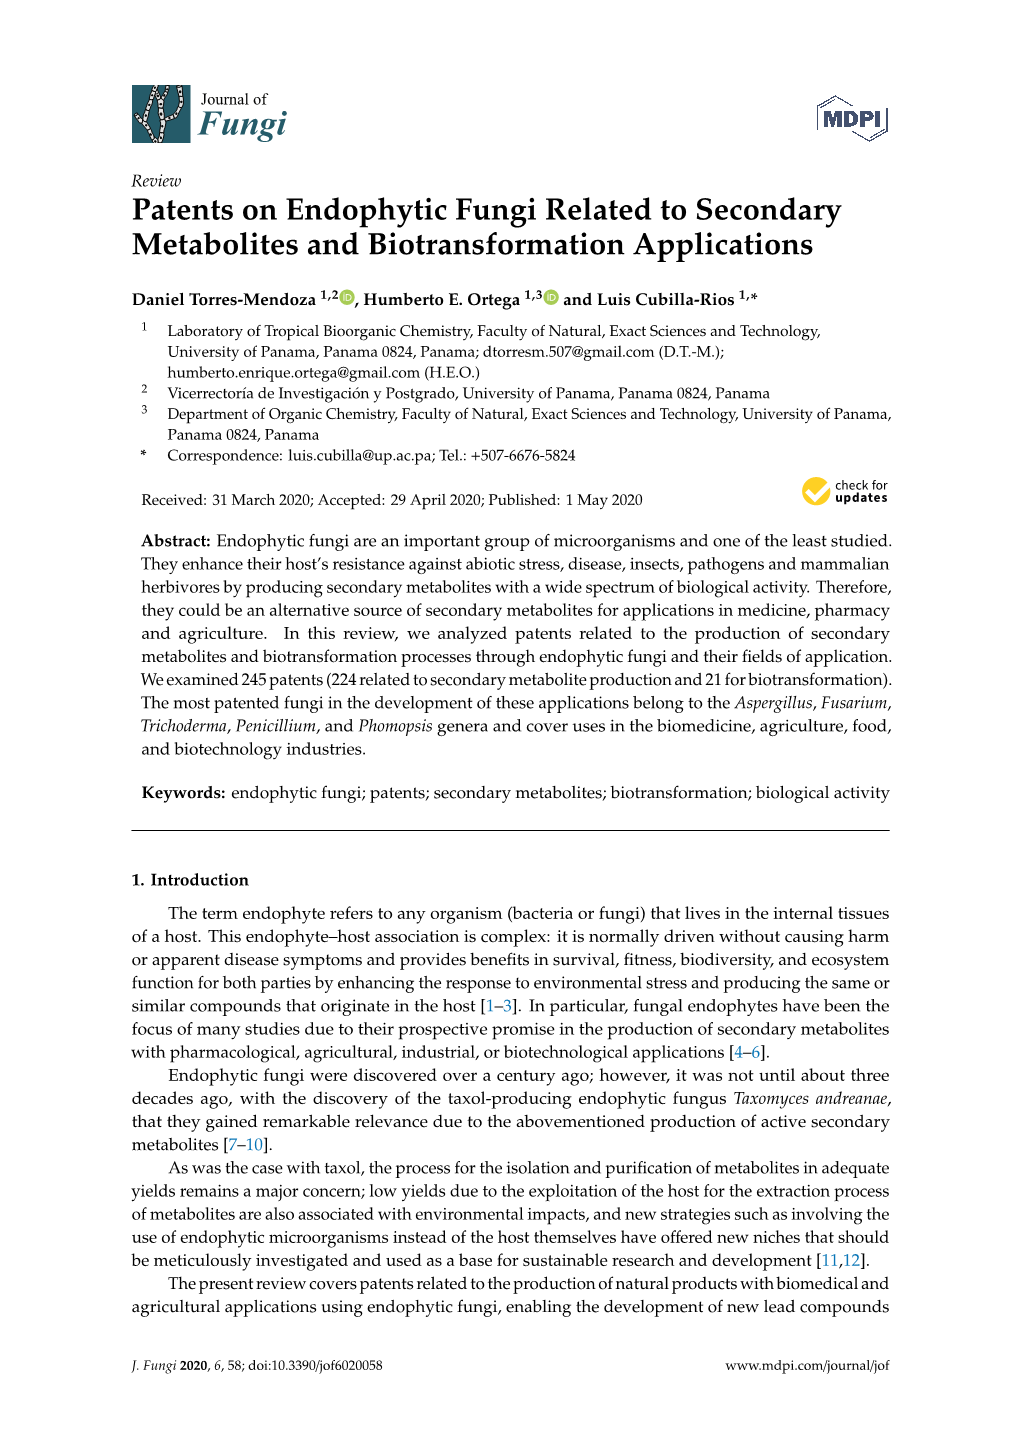 Patents on Endophytic Fungi Related to Secondary Metabolites and Biotransformation Applications